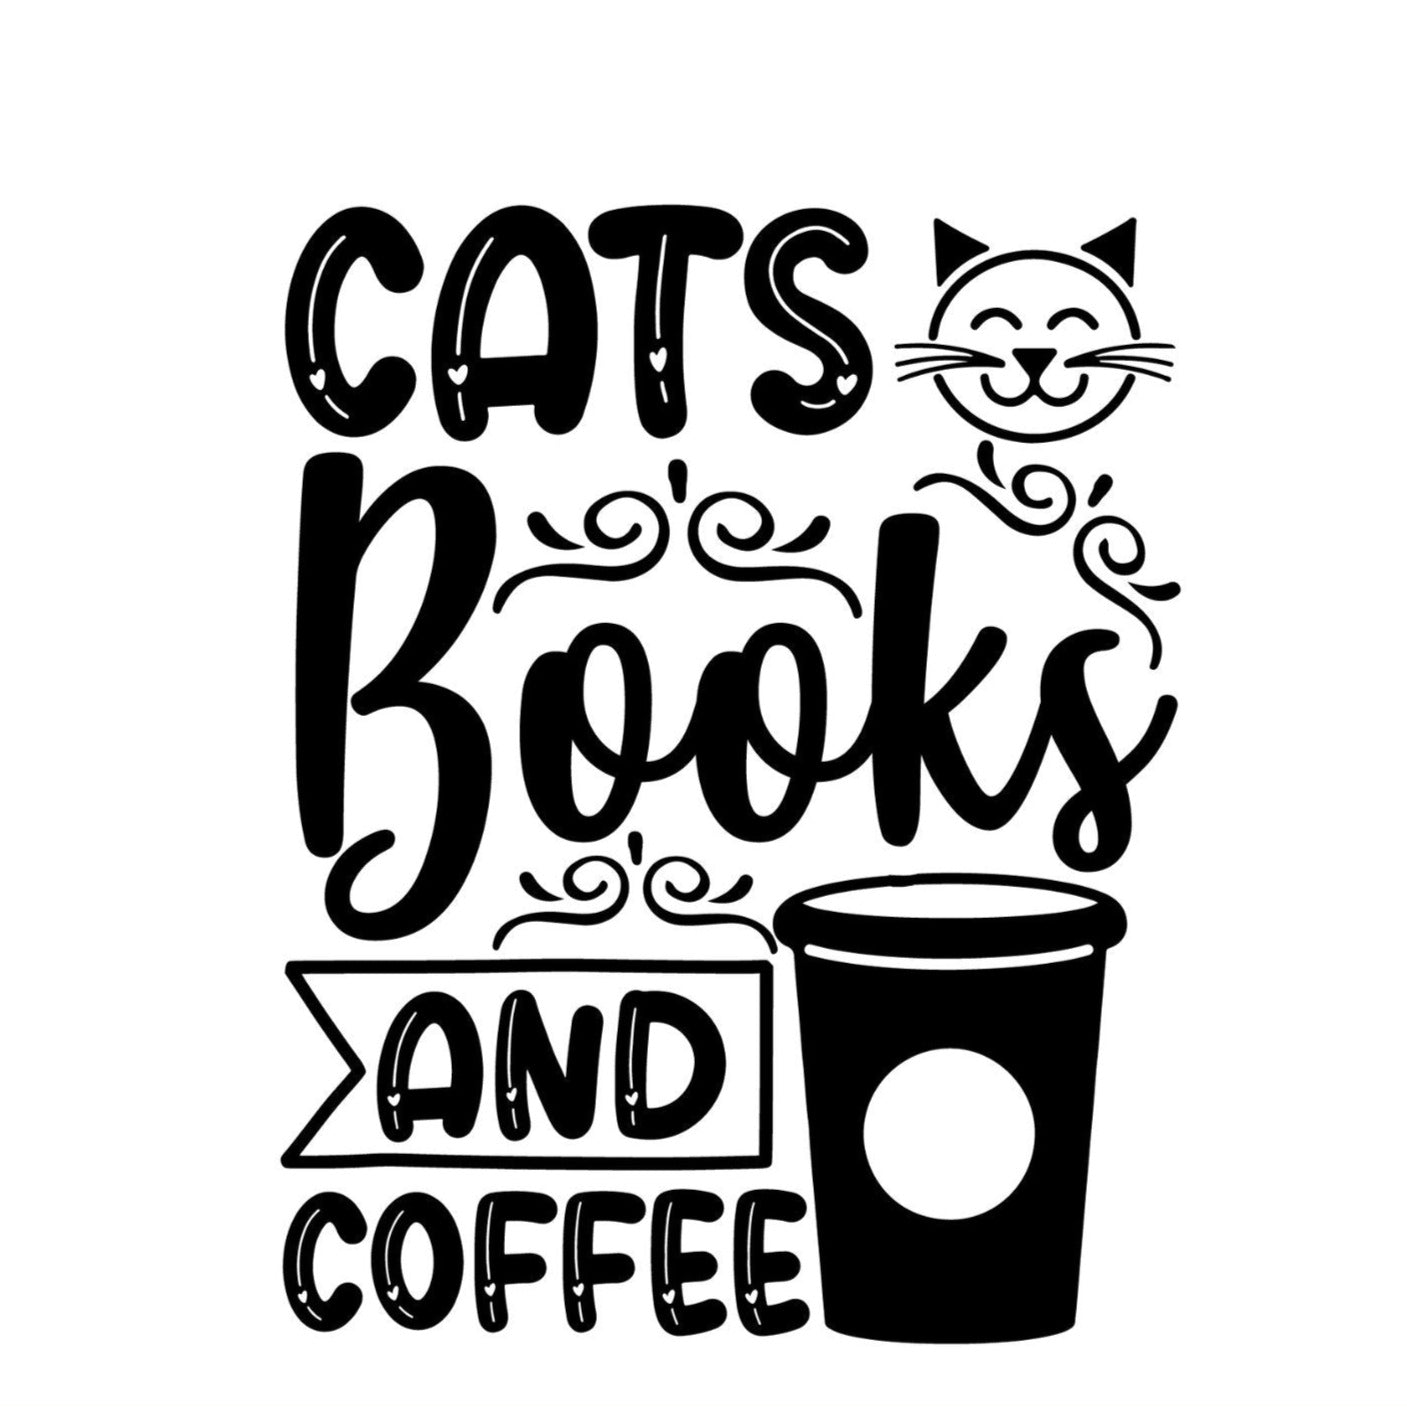 Cats Books And Coffee